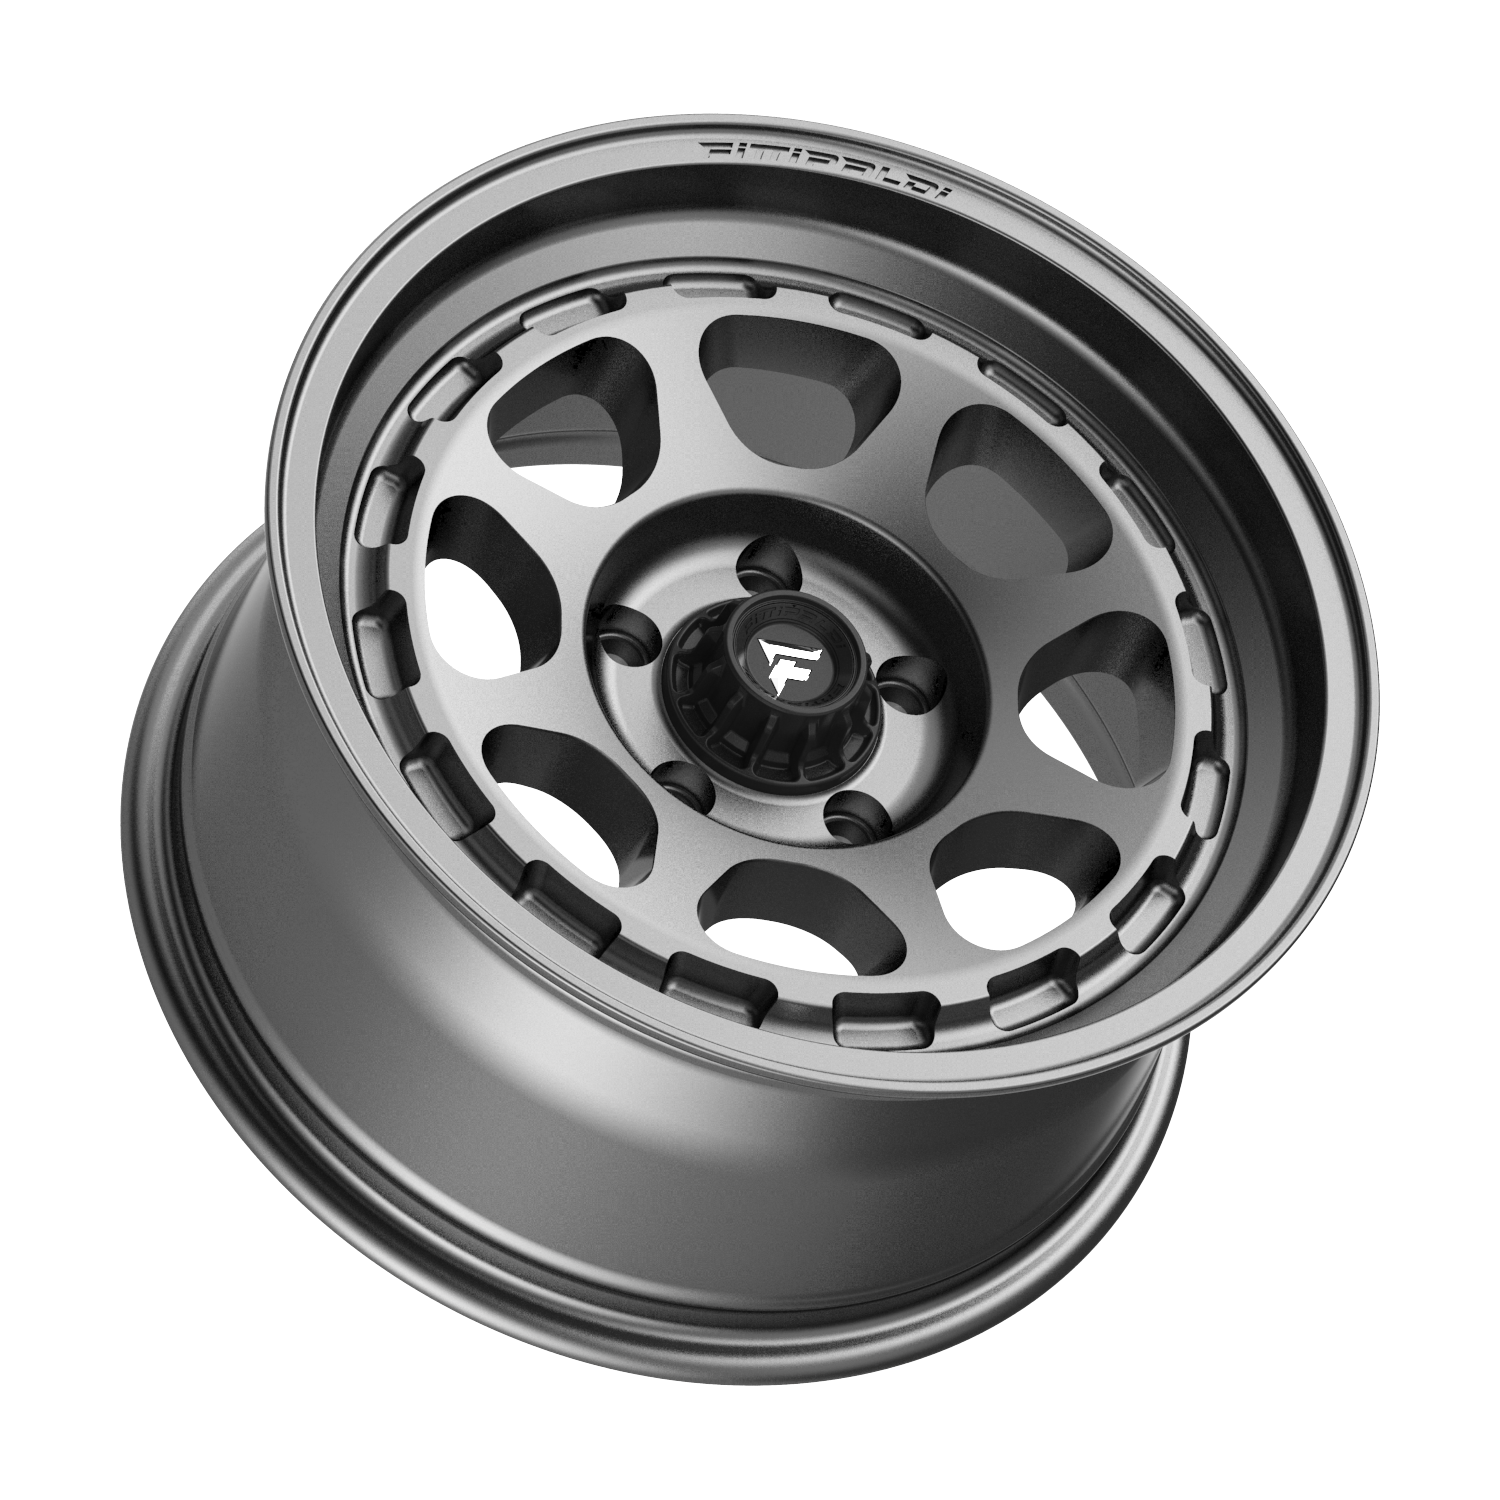 FITTIPALDI OFFROAD FT103A 17X8.5, PCD 5X5.00, ET +00, CB 71.5-SATIN ANTHRACITE